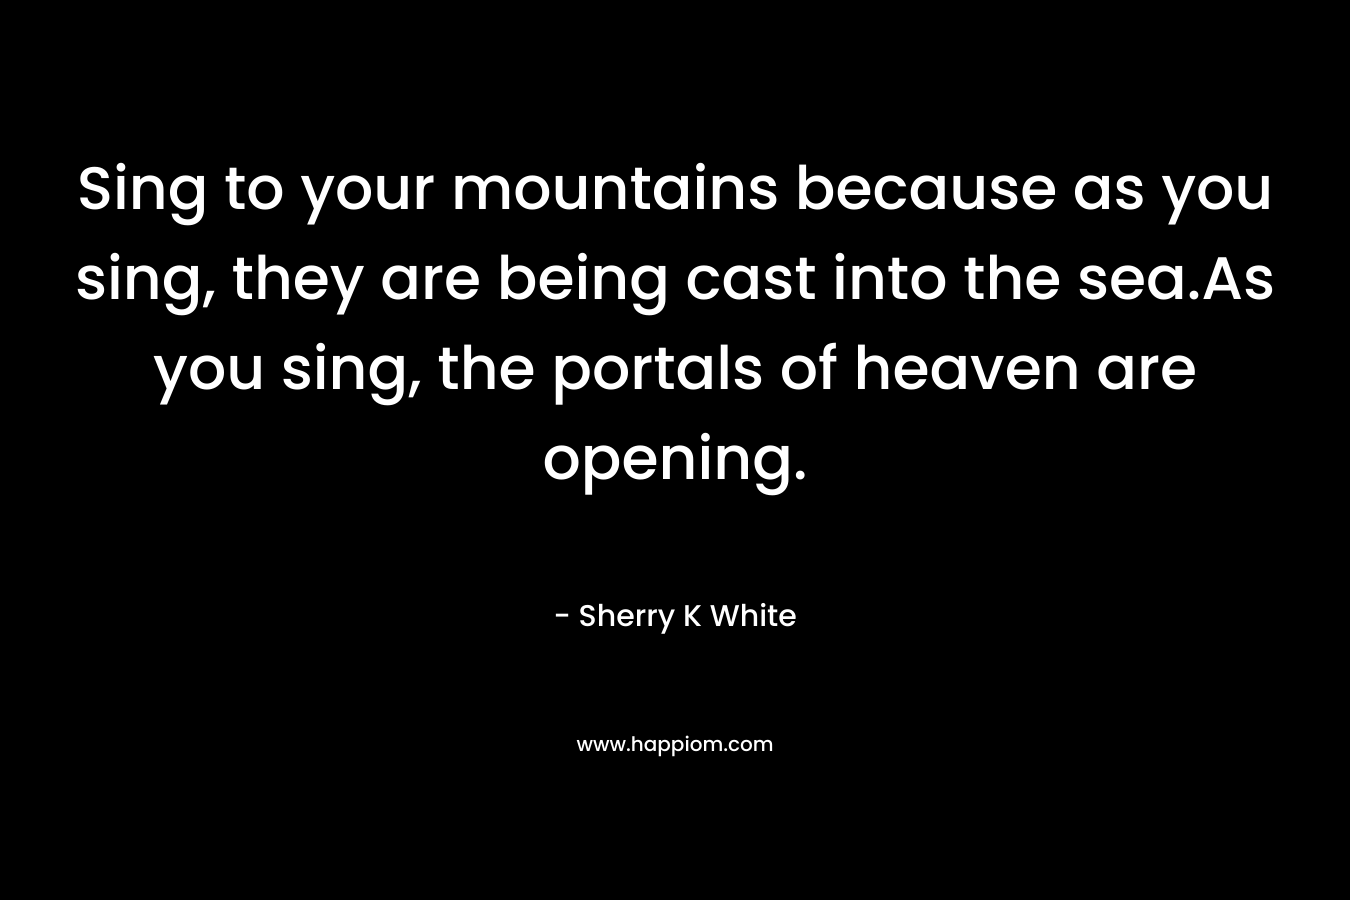 Sing to your mountains because as you sing, they are being cast into the sea.As you sing, the portals of heaven are opening.